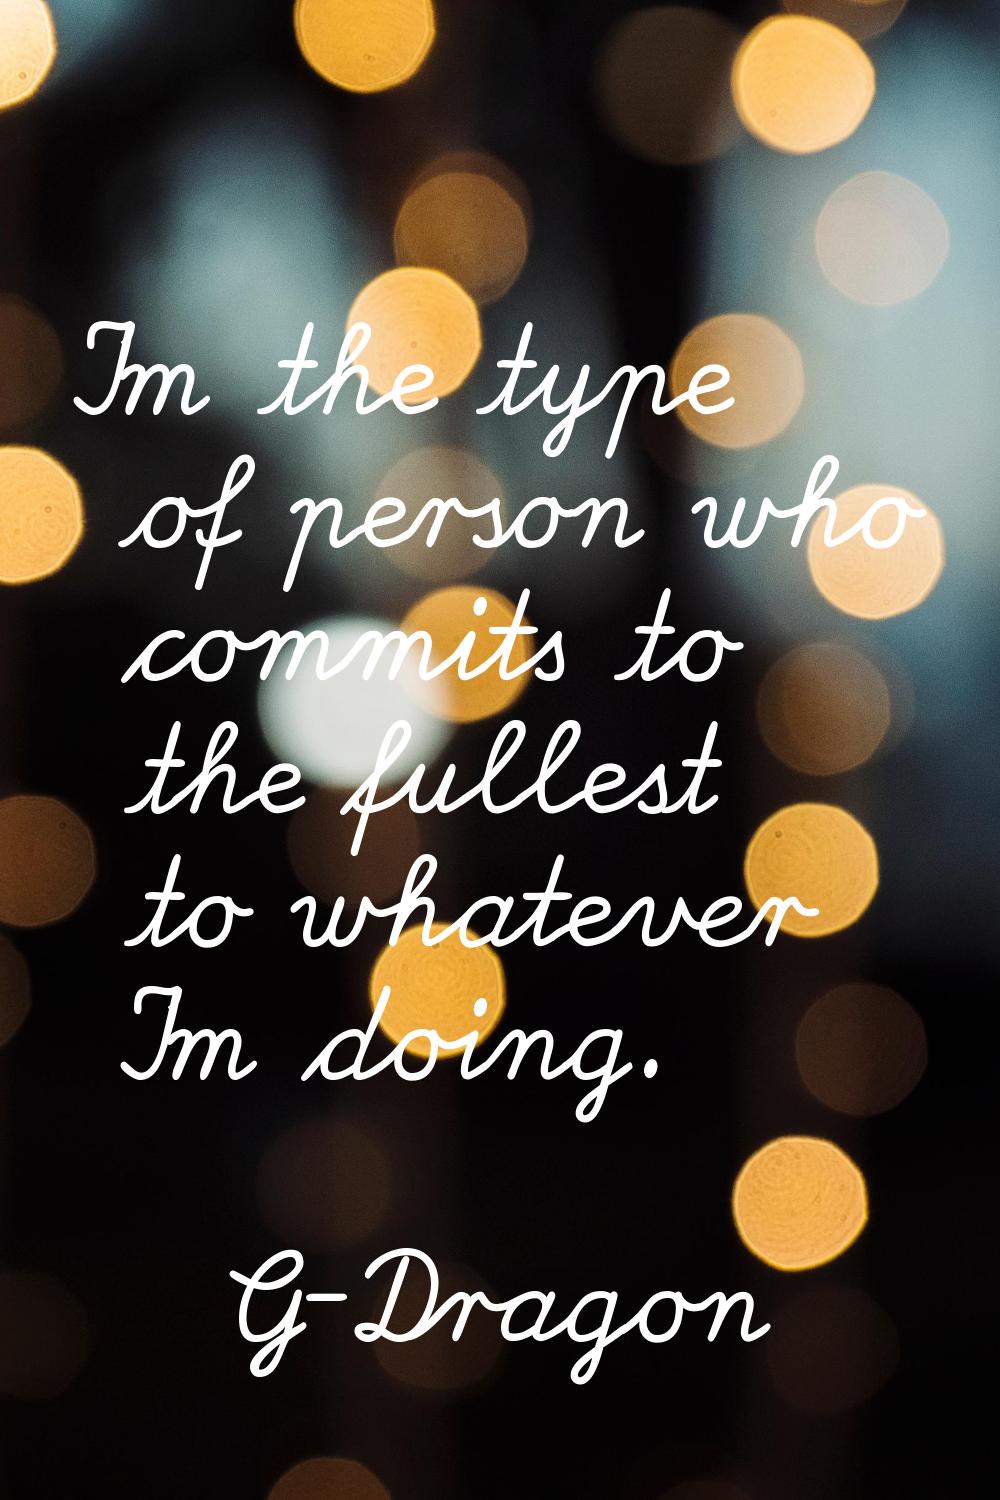 I'm the type of person who commits to the fullest to whatever I'm doing.